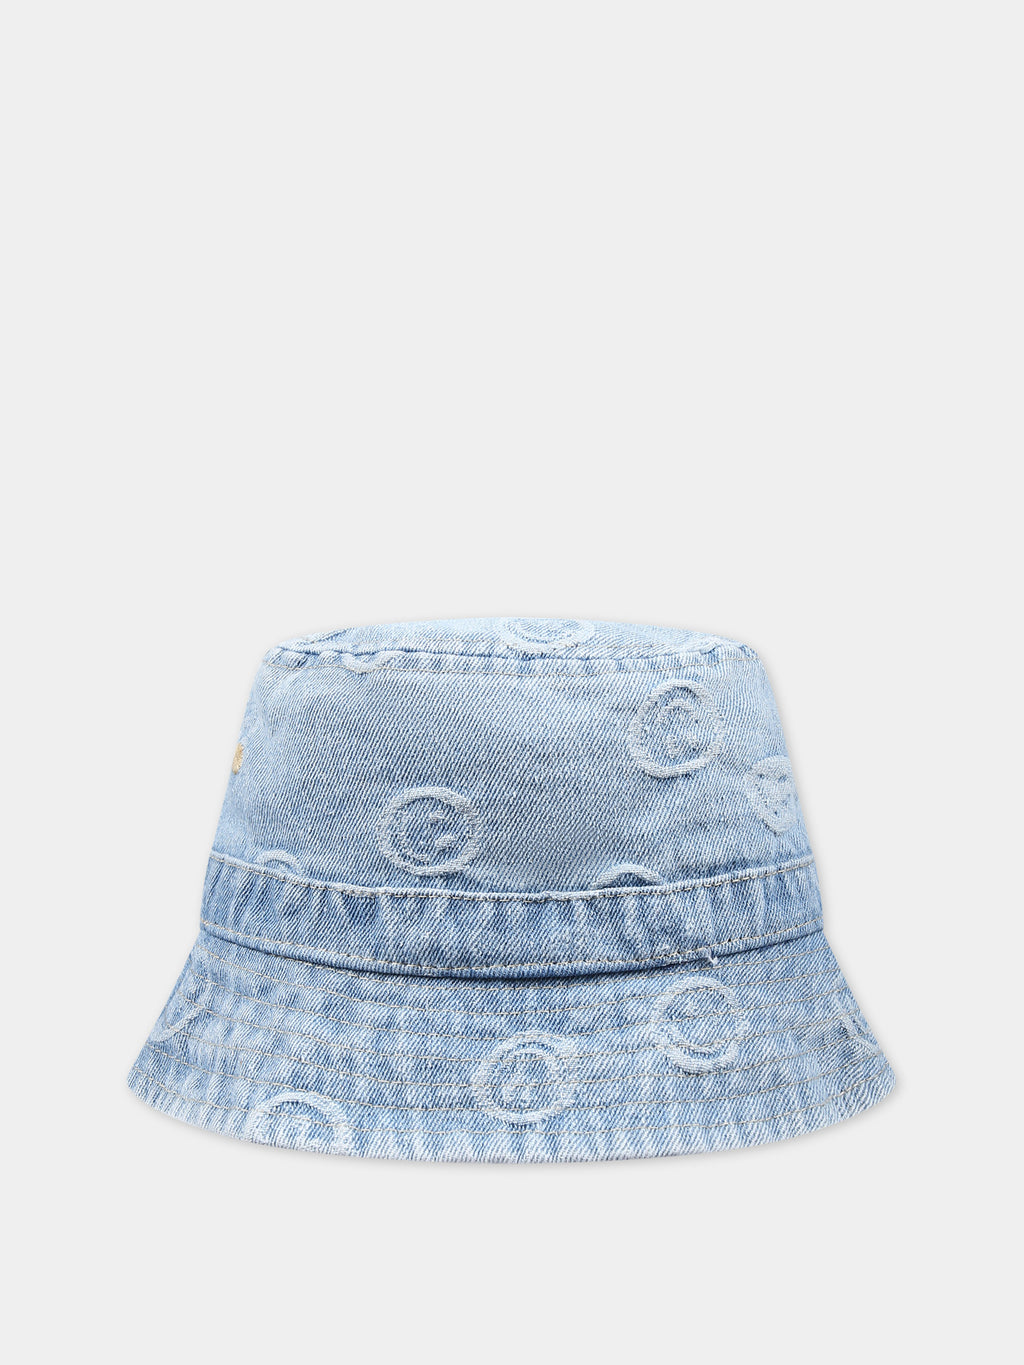 Denim sky blue cloche for kids with smile